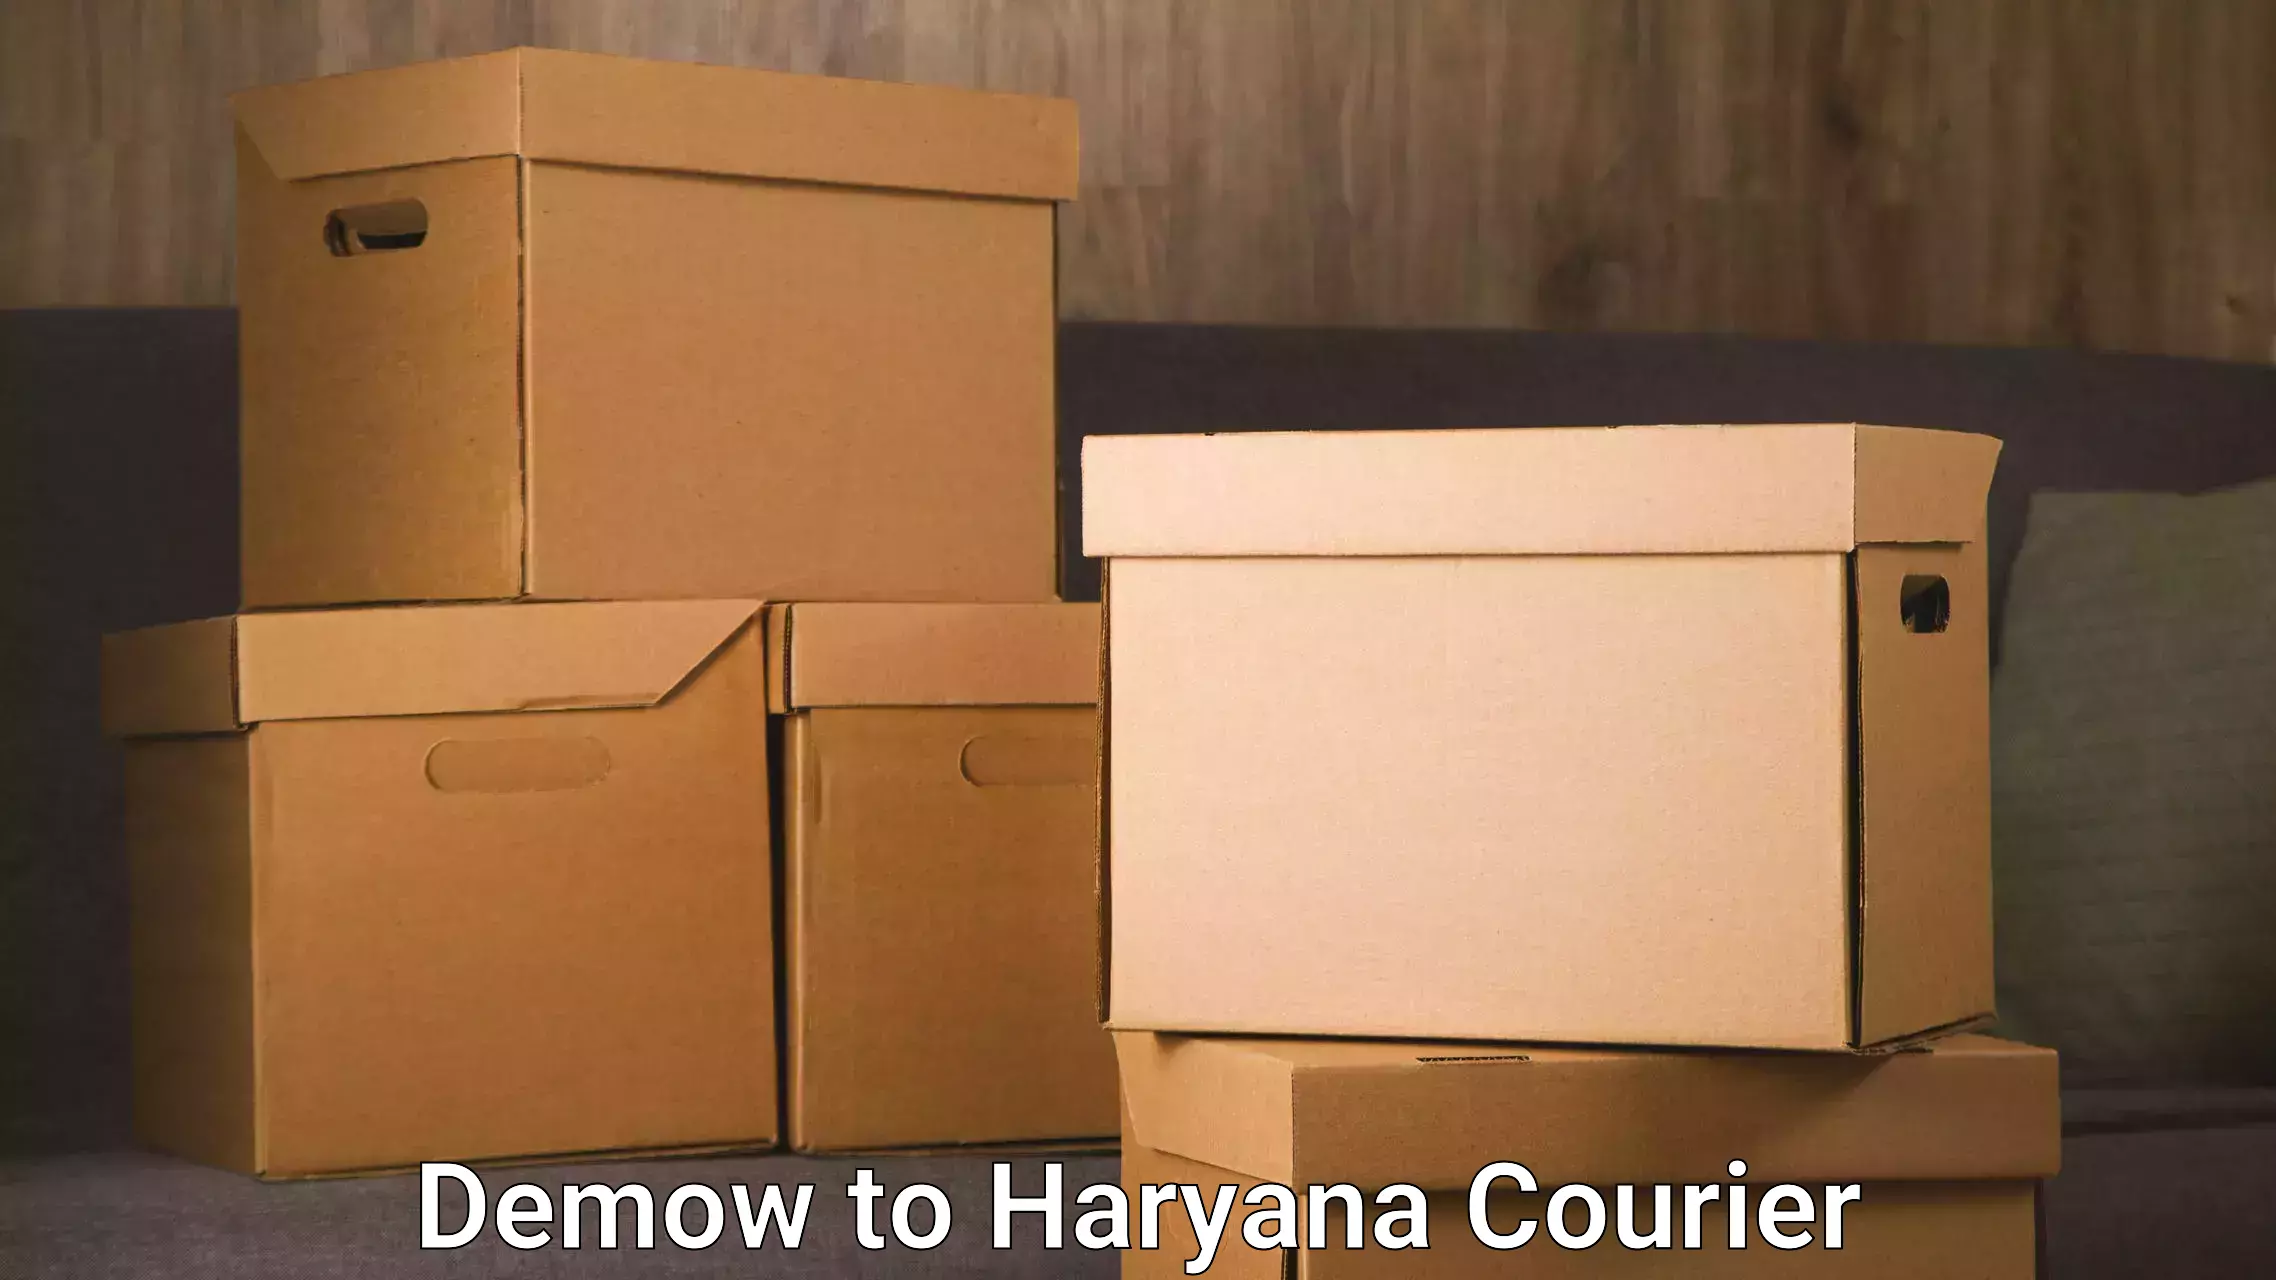 Overnight delivery services Demow to Haryana